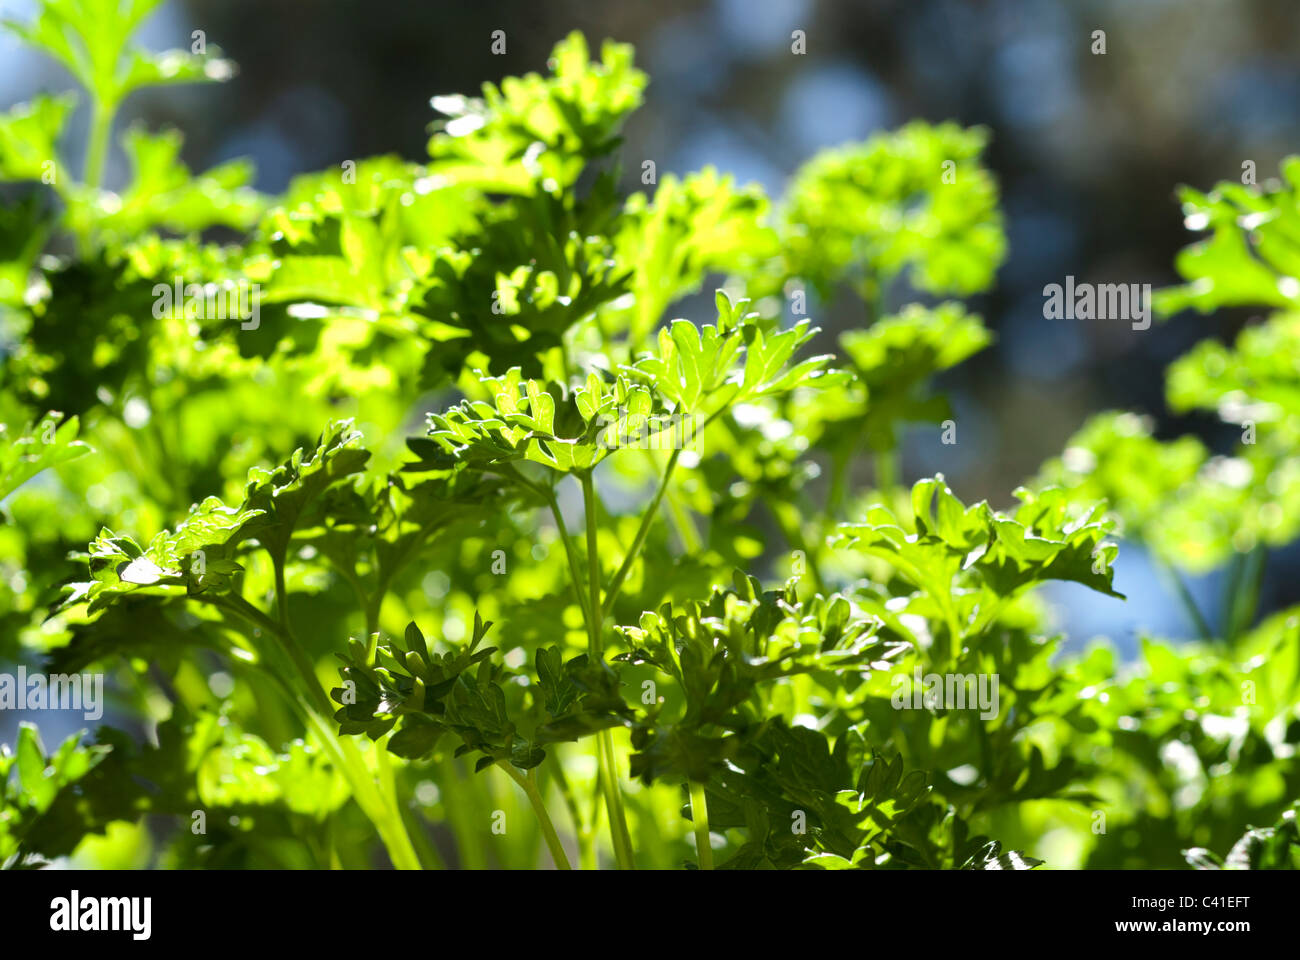 Closeup of a curly garden parsley plant Stock Photo